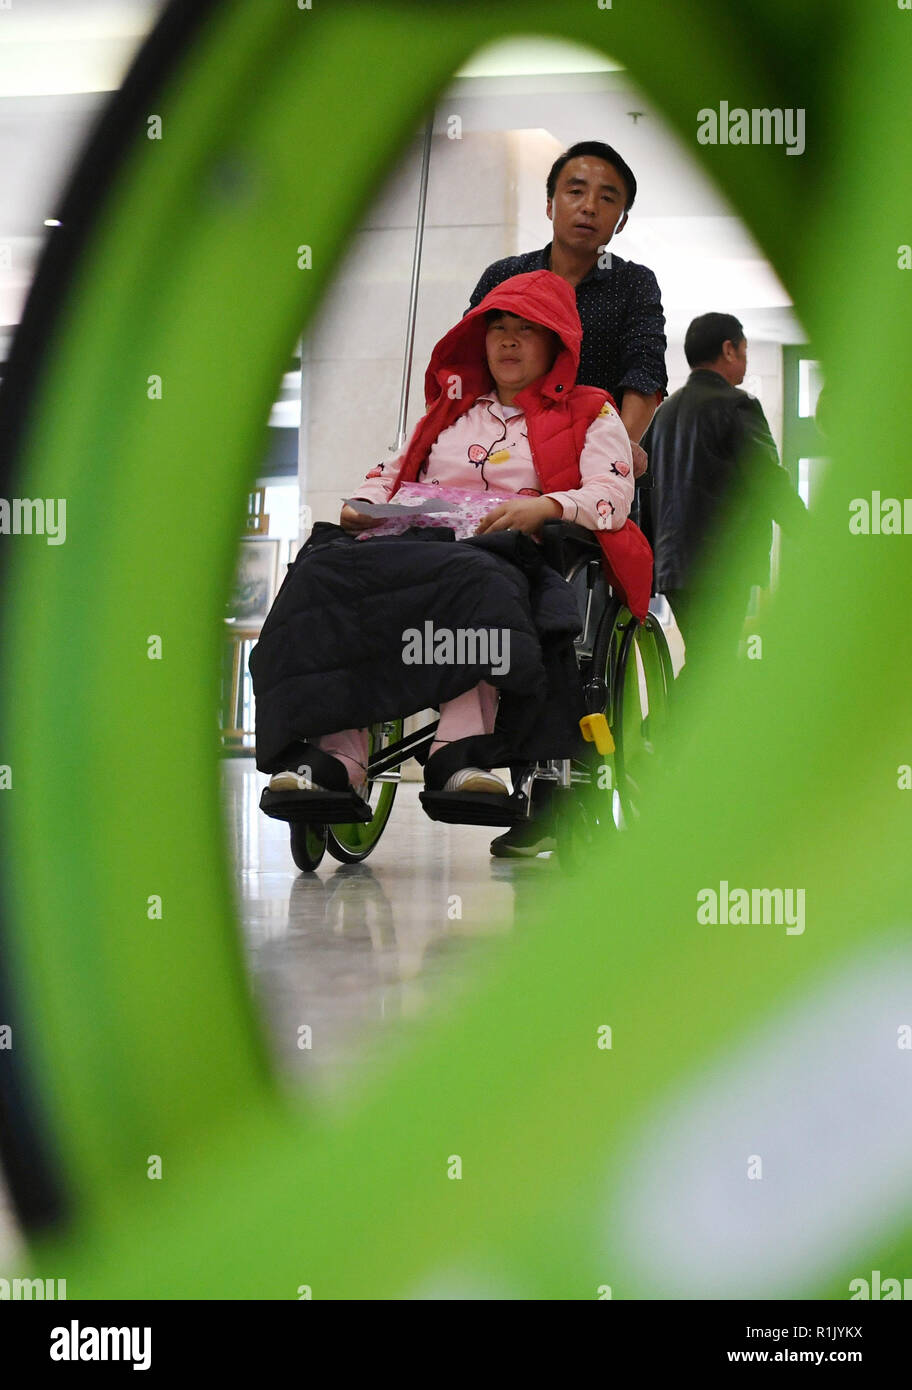 Lanzhou, China's Gansu Province. 13th Nov, 2018. A patient uses a shared wheelchair at the Gansu Provincial Maternity and Child-care Hospital in Lanzhou, capital of northwest China's Gansu Province, on Nov. 13, 2018. Recently, a batch of shared wheelchairs were put into use at the hospital. Users can access the service after scanning the QR code and paying a deposit. The service is free for the first two hours. Credit: Chen Bin/Xinhua/Alamy Live News Stock Photo